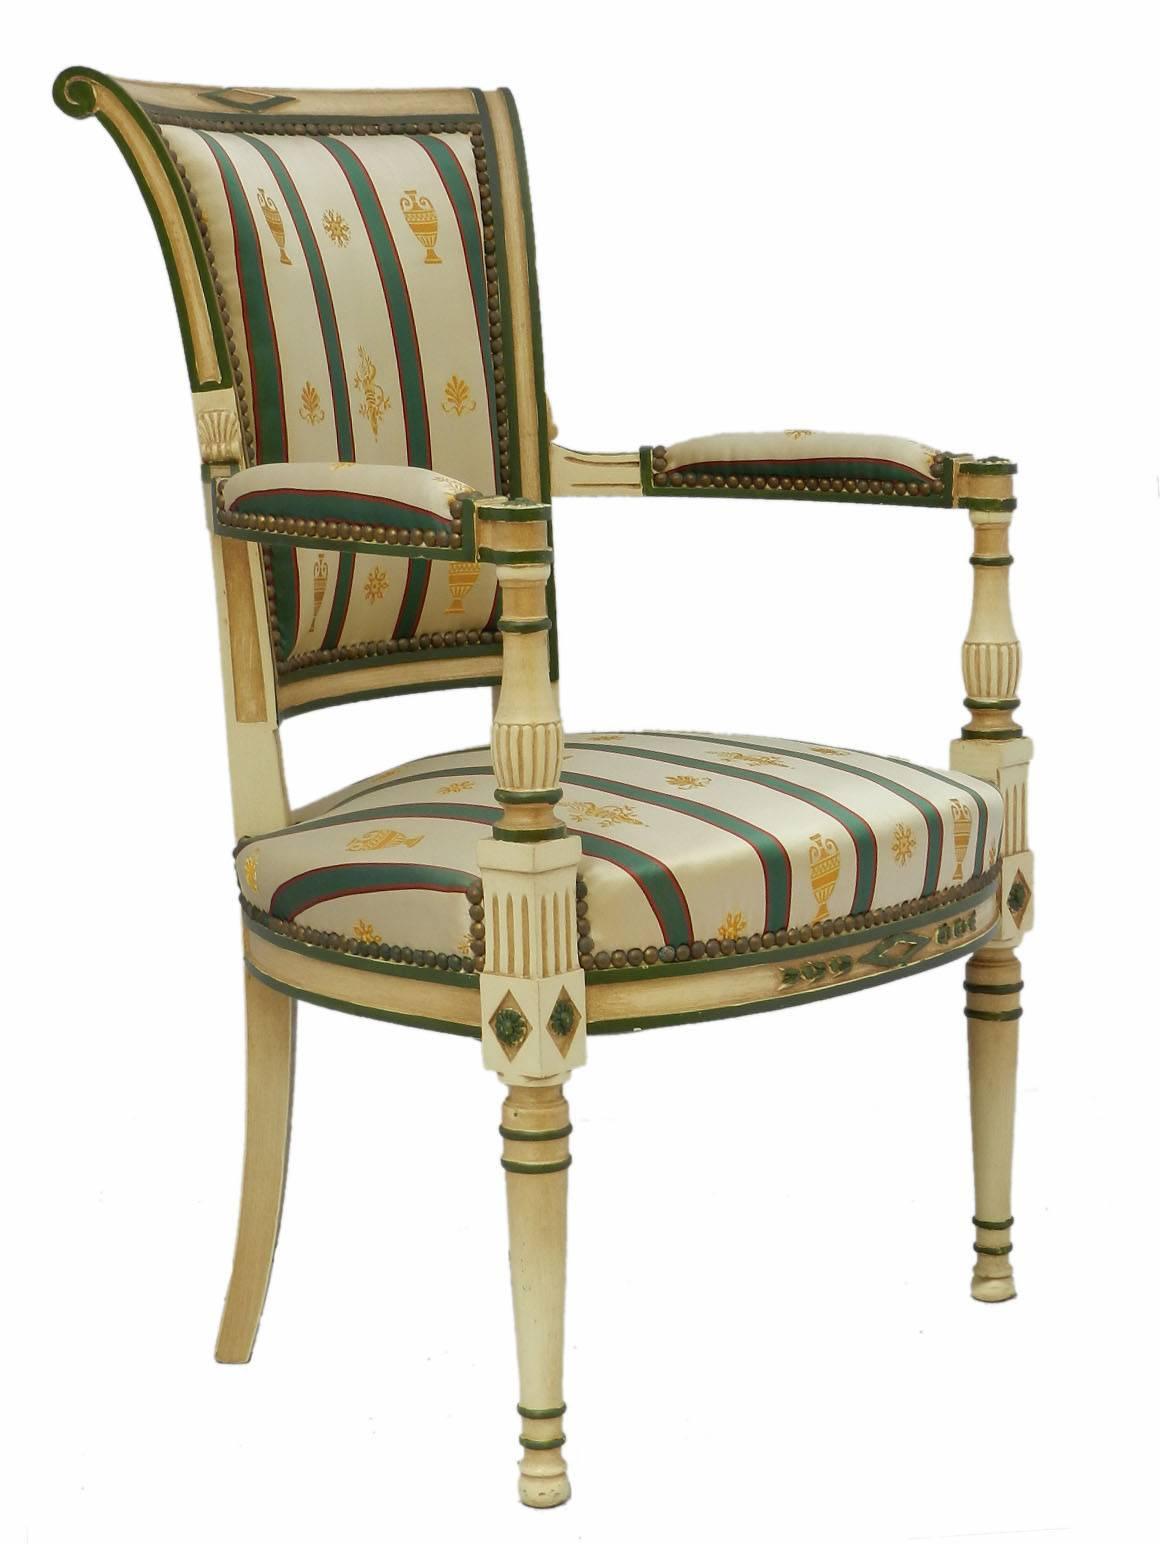 Painted French Open Armchair Upholstered Vintage Directoire Empire Revival Mid 20th Cent